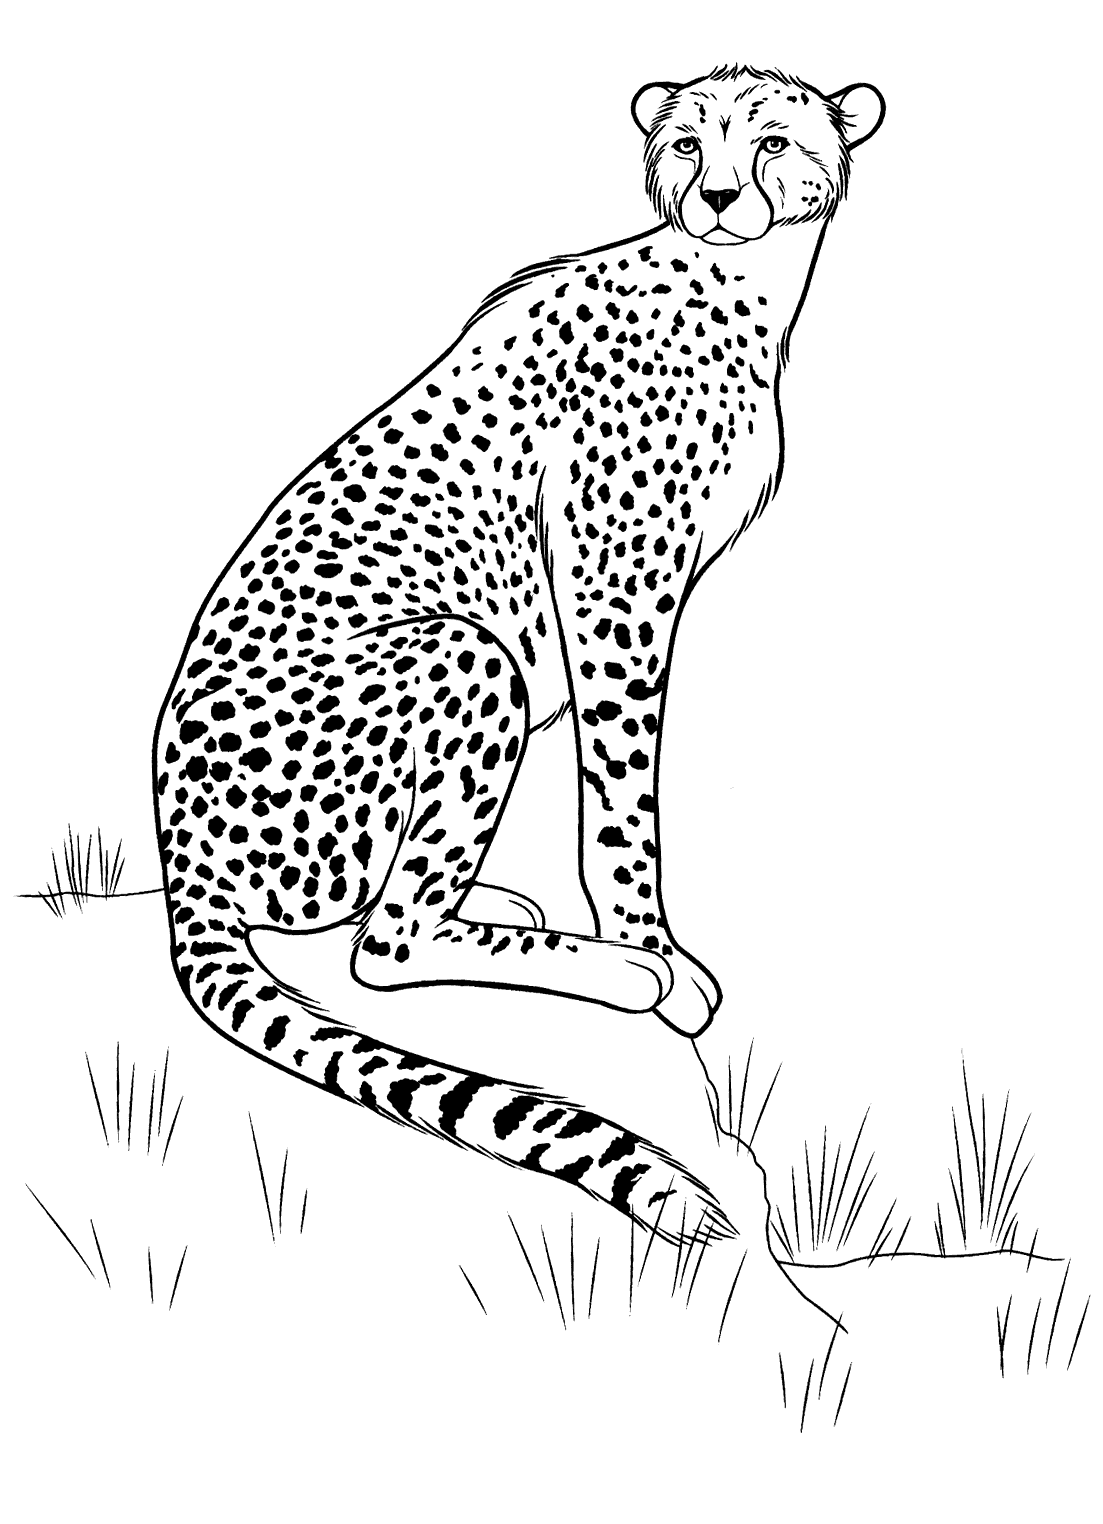 Coloring page - Cheetah on the hunt